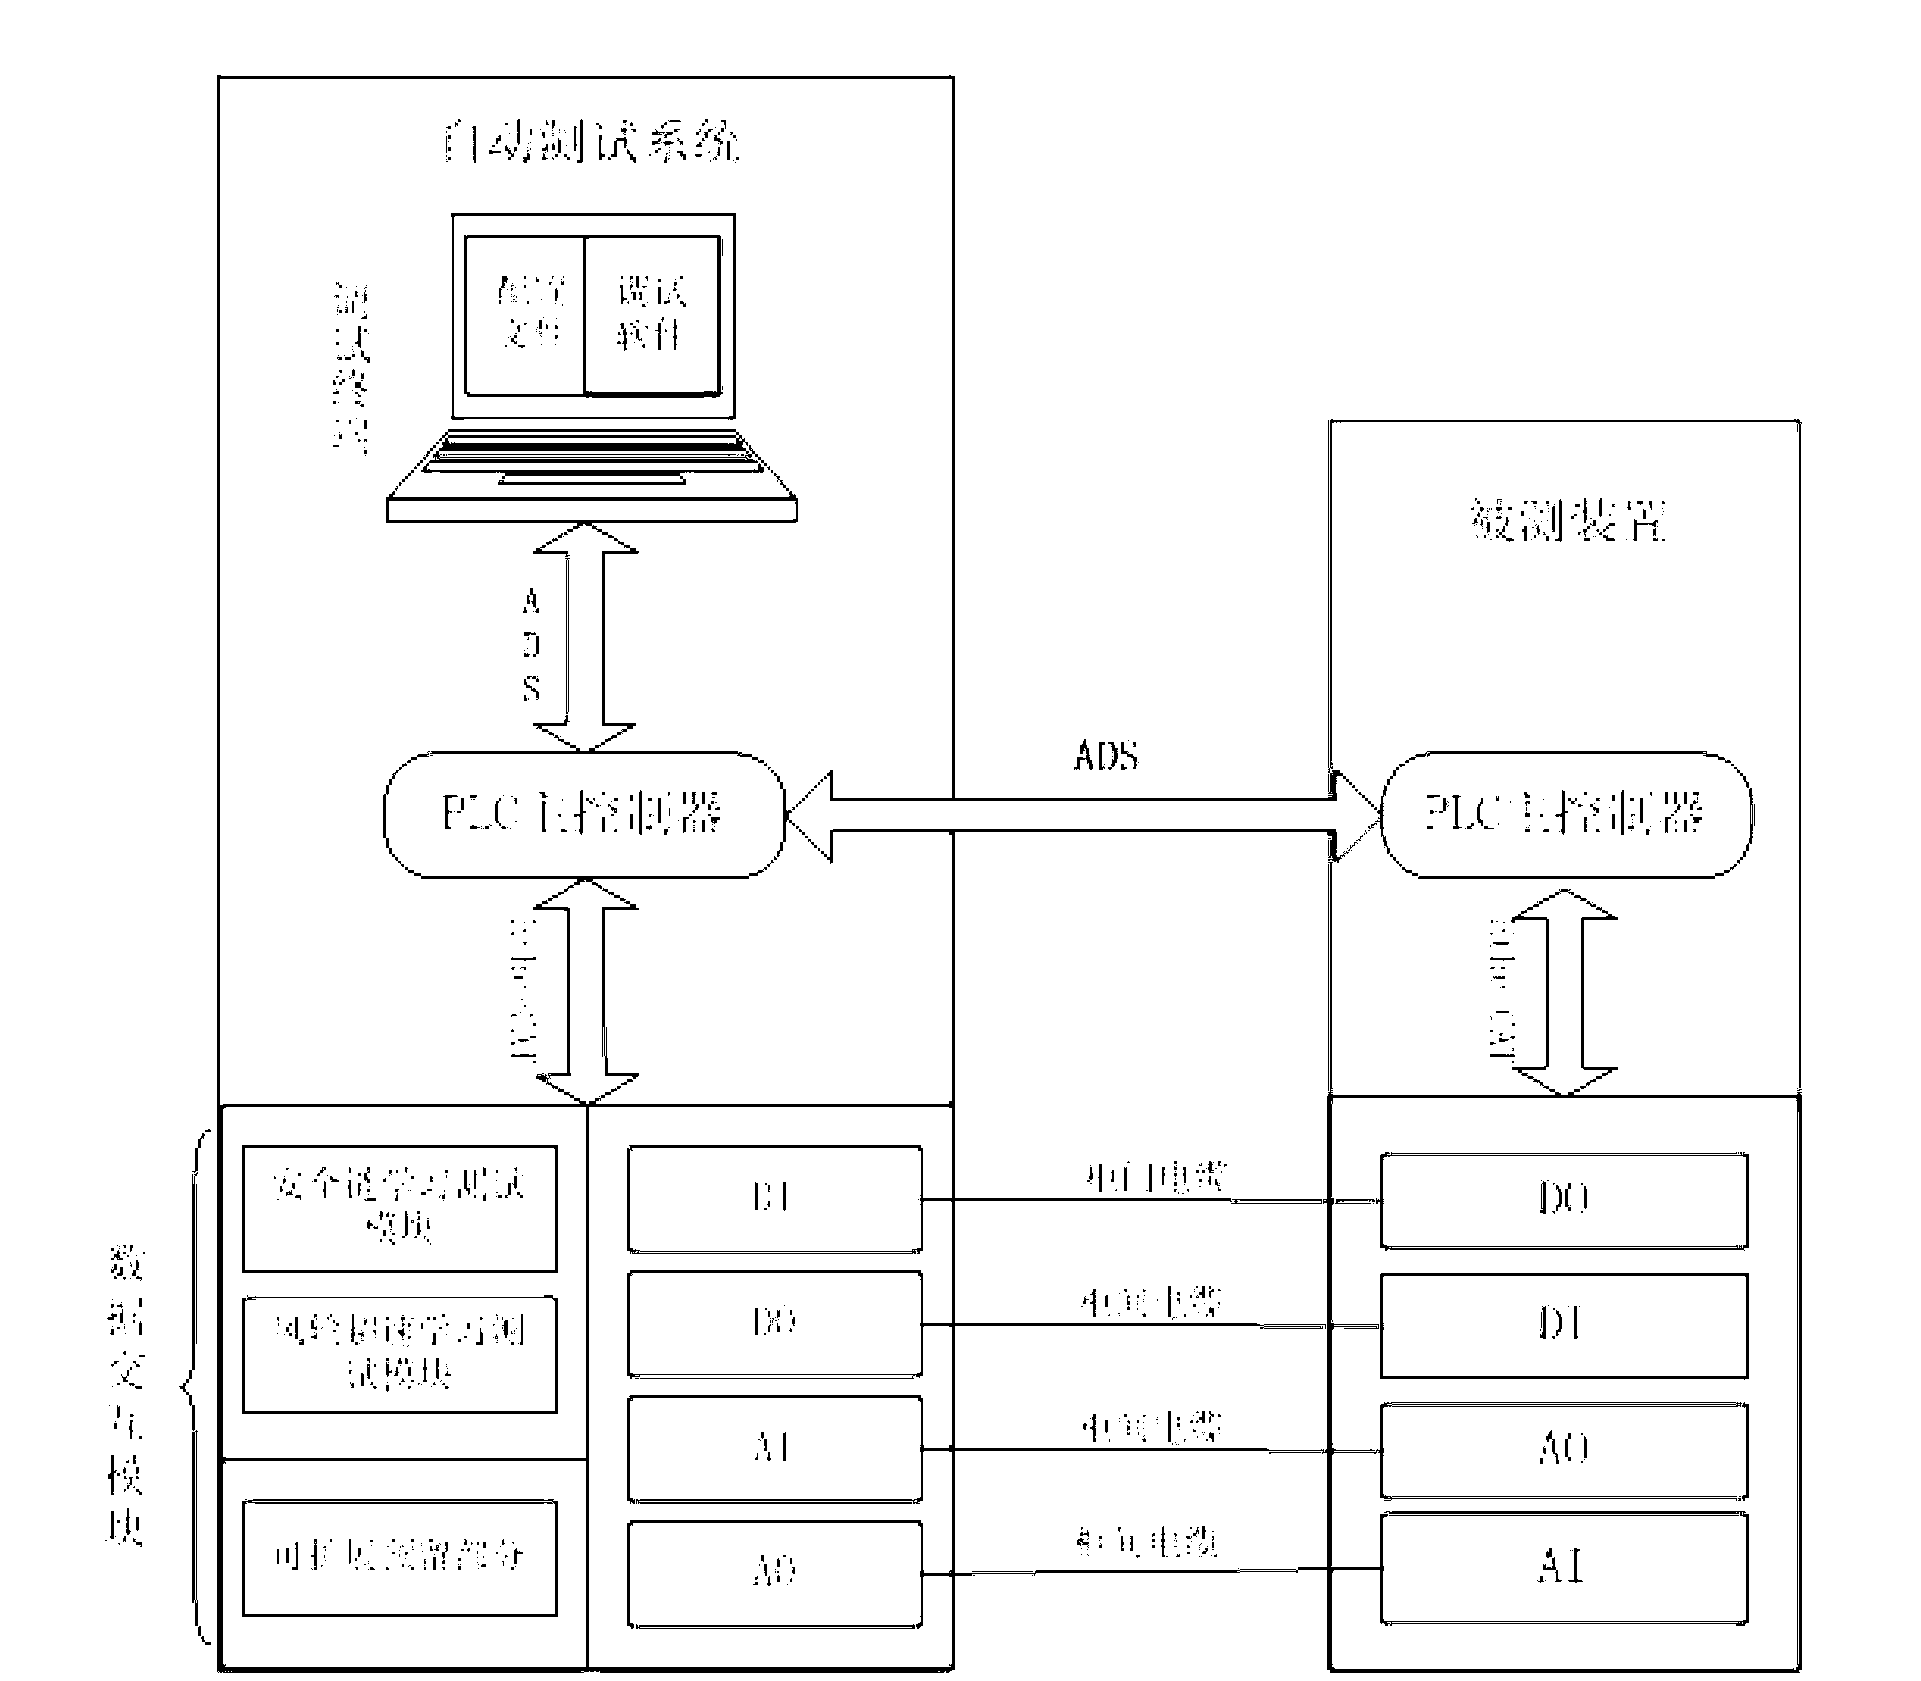 System and method for automatically testing main control hardware of fan on basis of PLC (Programmable Logic Controller)